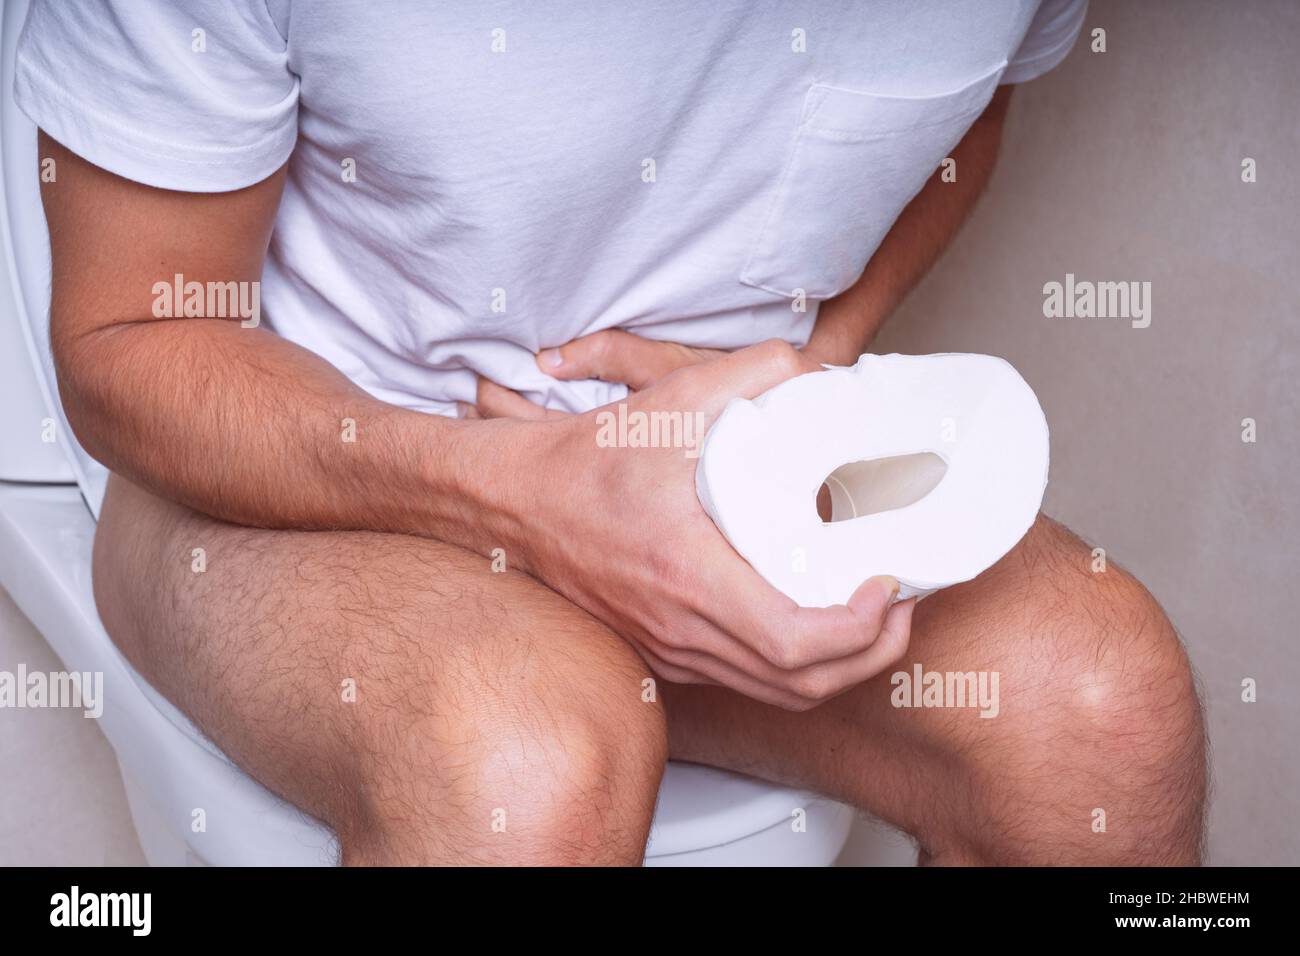 Man sitting on the toilet and suffering from stomach pain, constipation, diarrhoea or stomach cramps Stock Photo